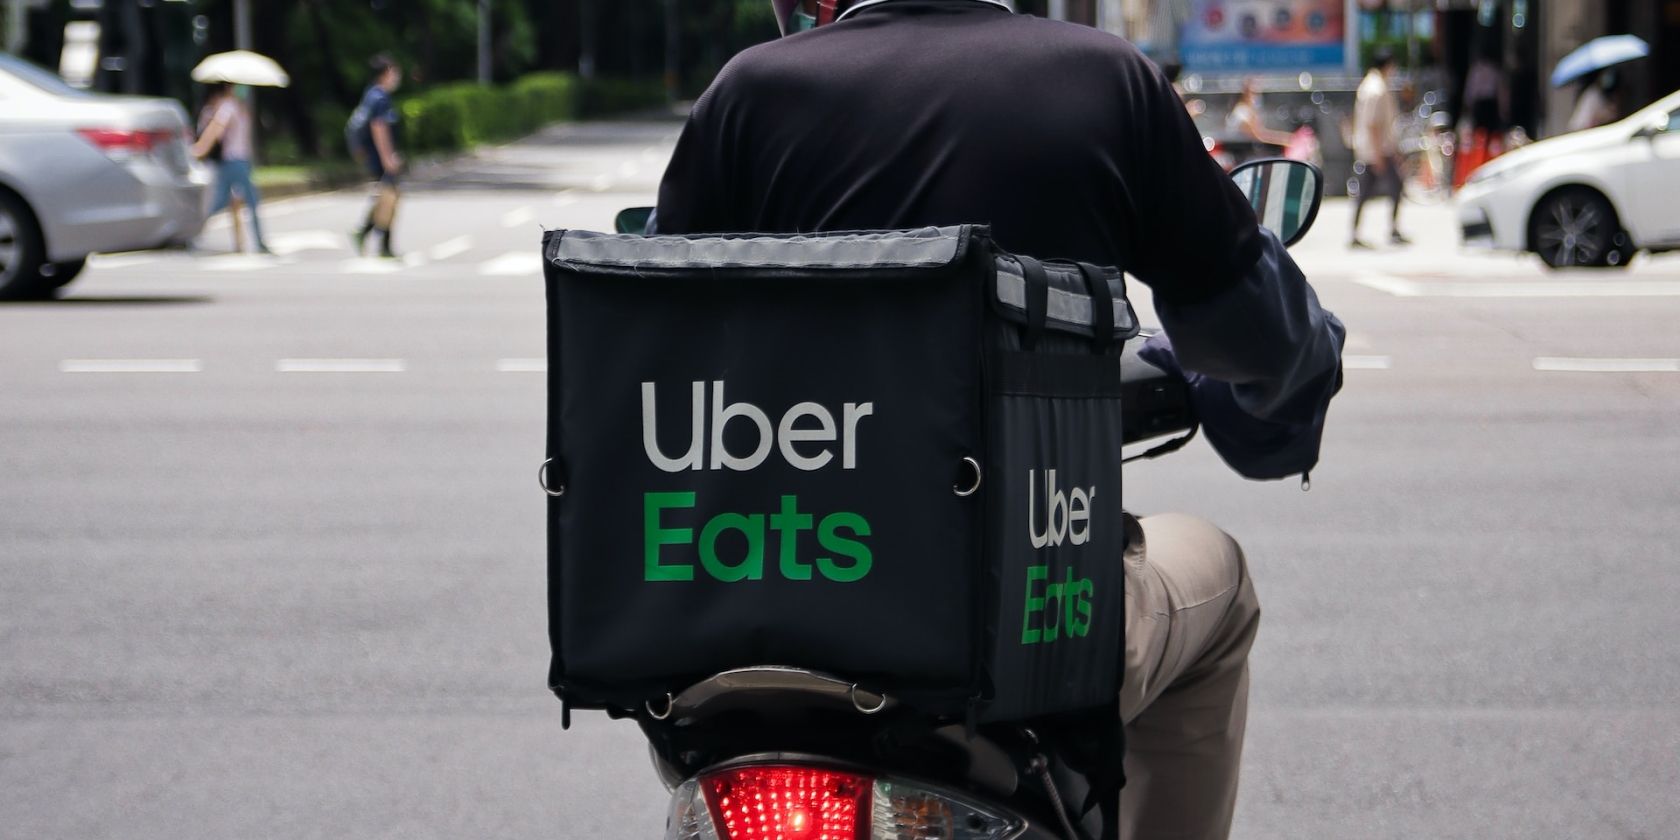 Uber Eats delivery in a scooter